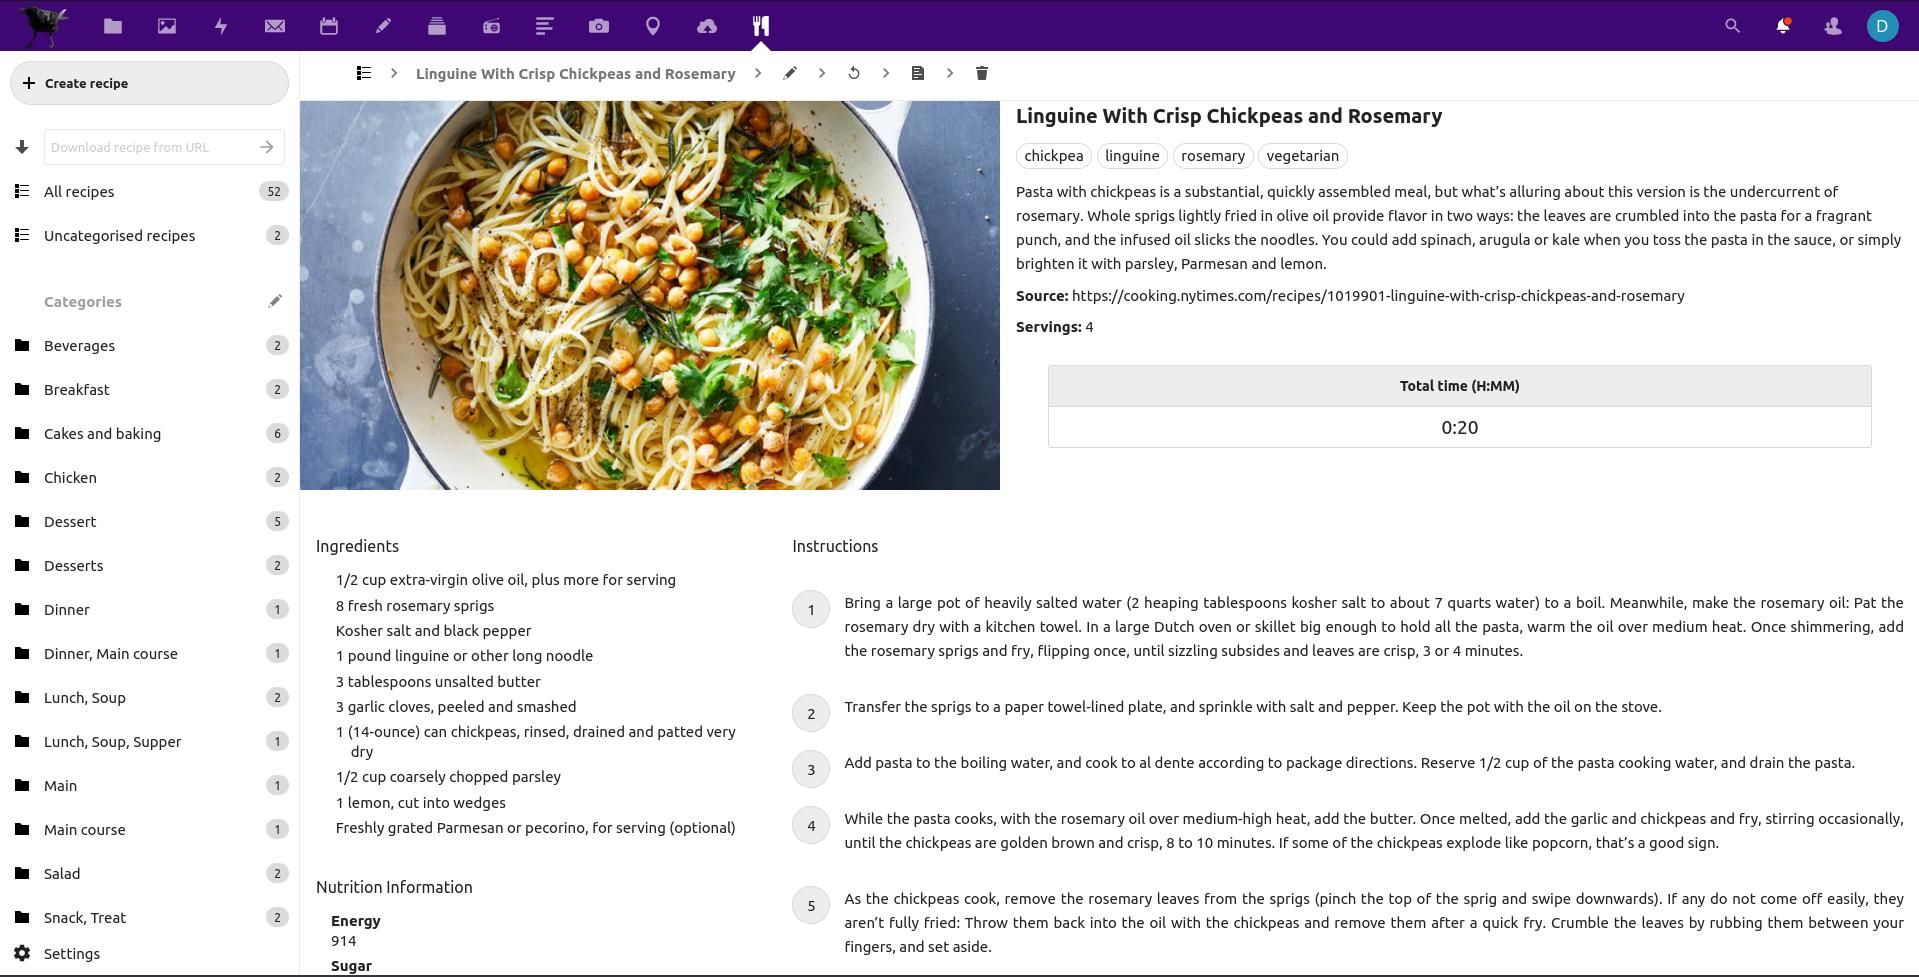 nextcloud cookbook showing a recipe for Linguine With Crisp Chickpeas and Rosemary